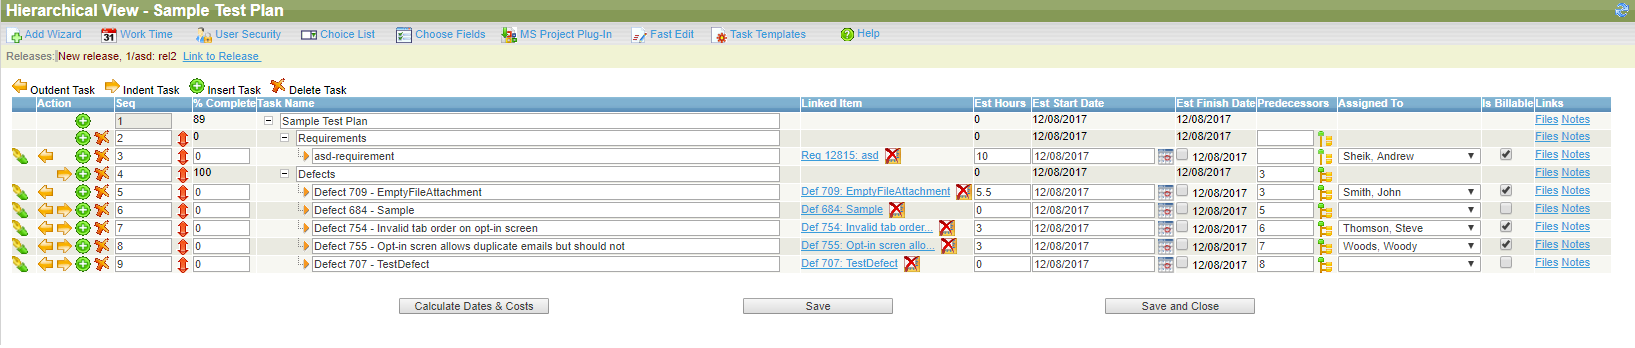 Hierarchial task view